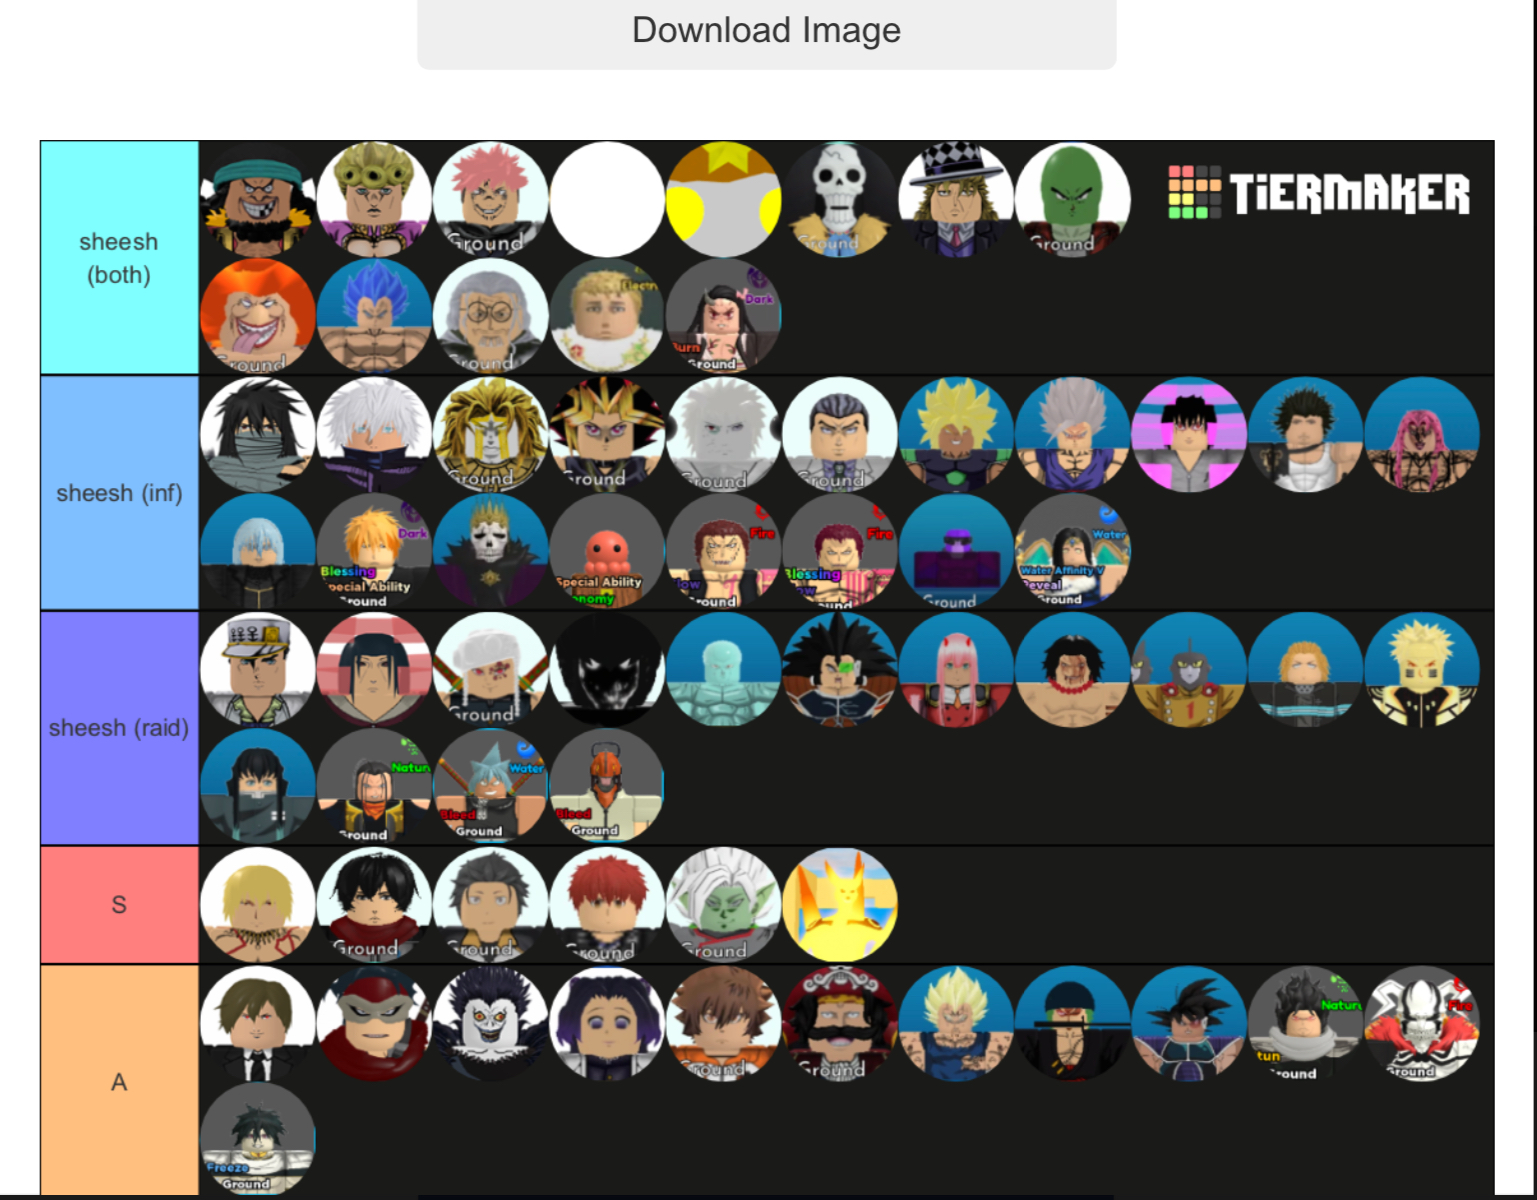 All Star Tower Defense Tier List 2023, Best Characters in the tier - News